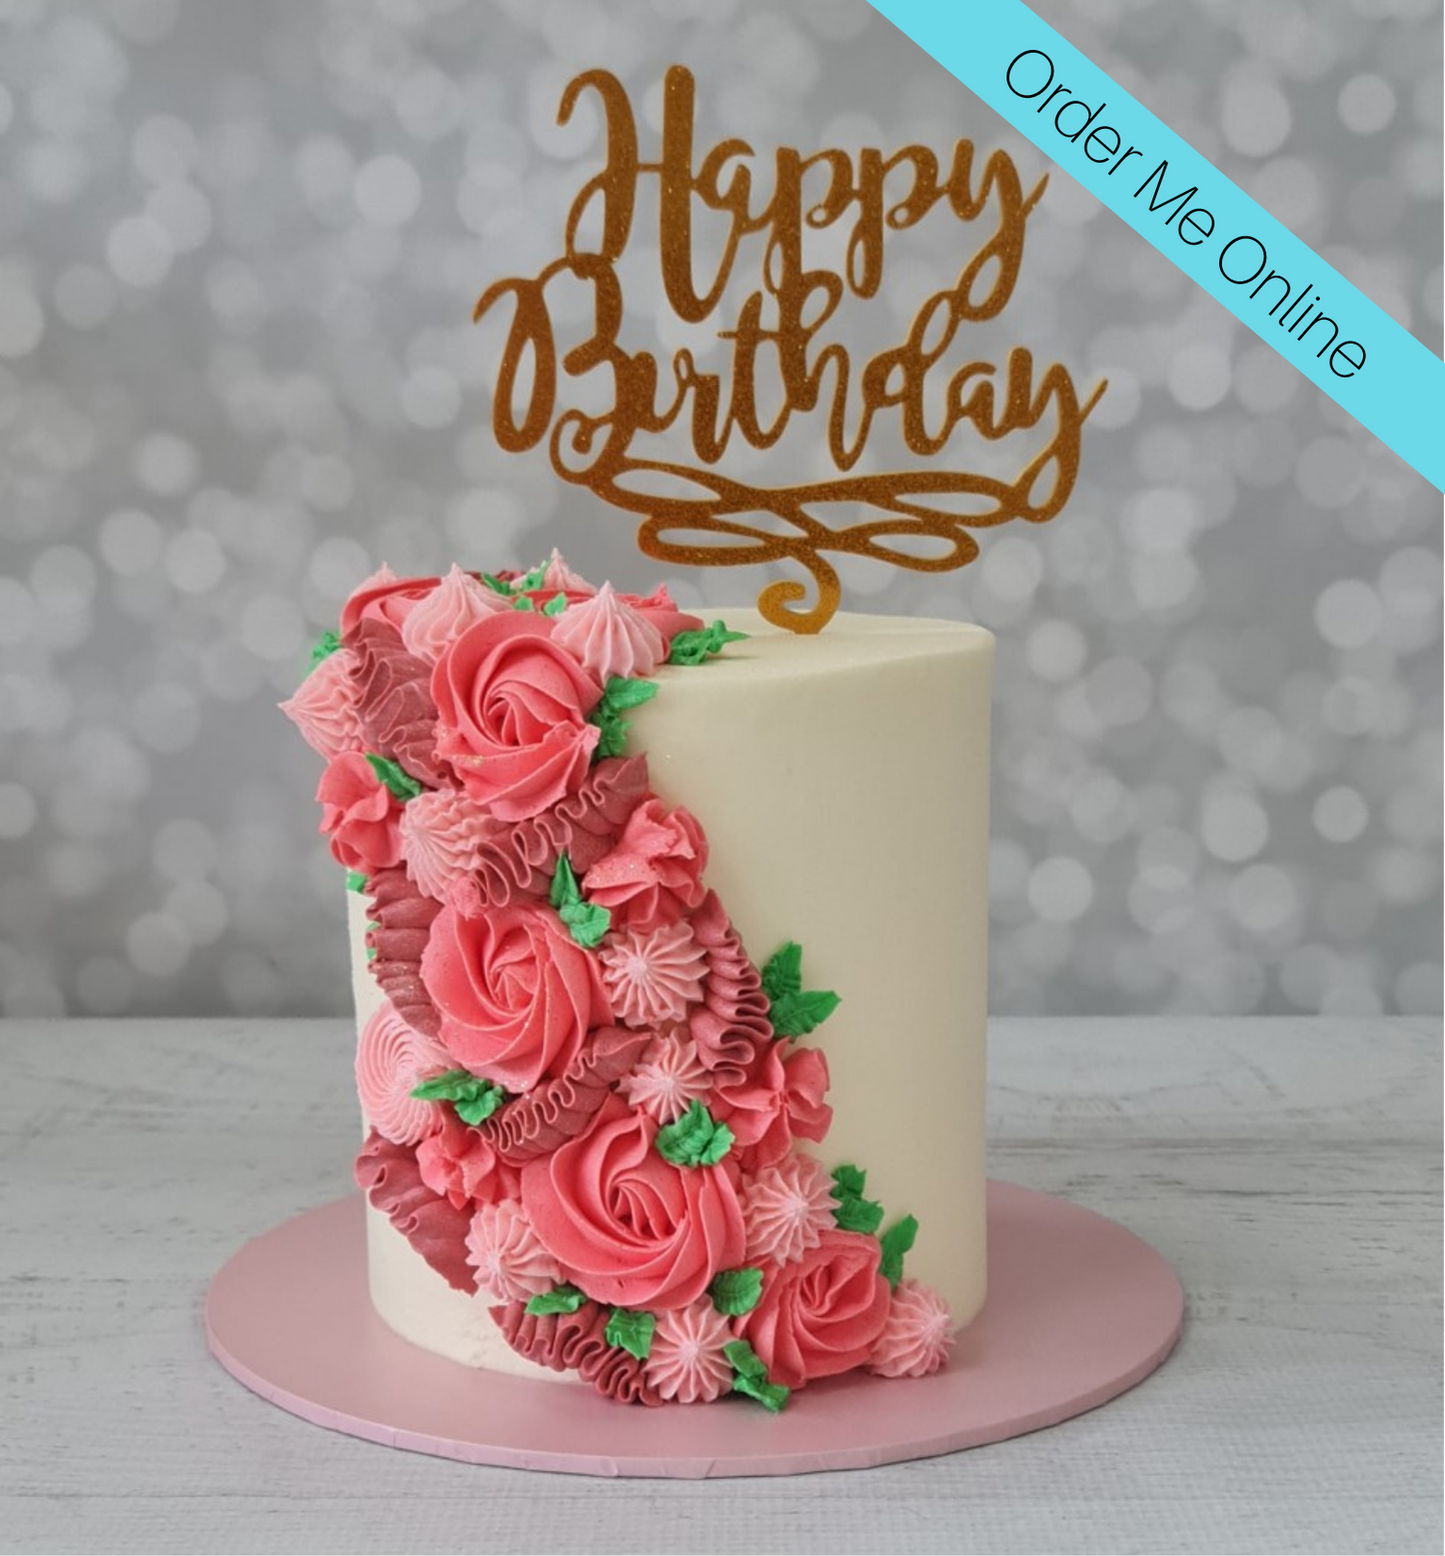 Amazon.com: Gold Glitter Happy 51st Birthday Cake Topper - 51 Sign Cake  Topper - Cheers to 51 Years Party Supplies - 51st Birthday Party Decoration  : Grocery & Gourmet Food